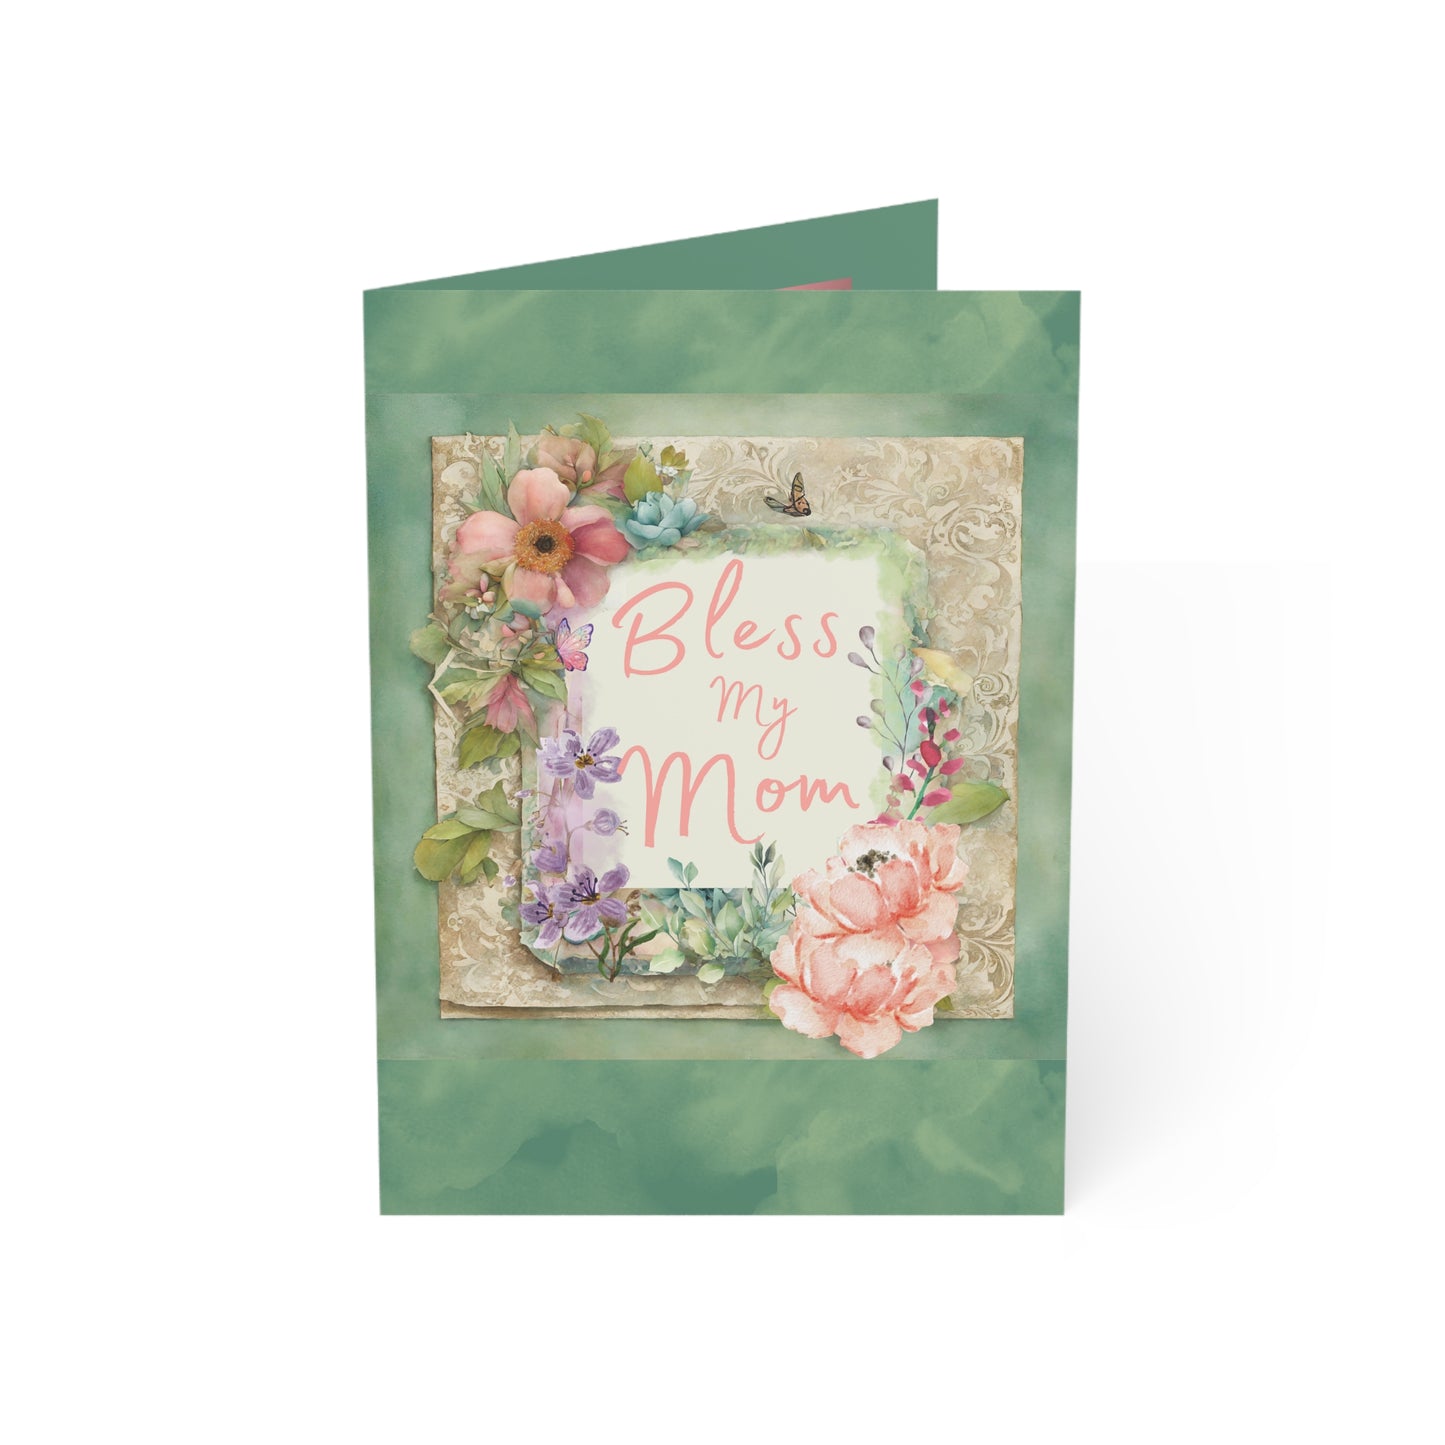 Bless My Mom Greeting Cards (1 pcs)